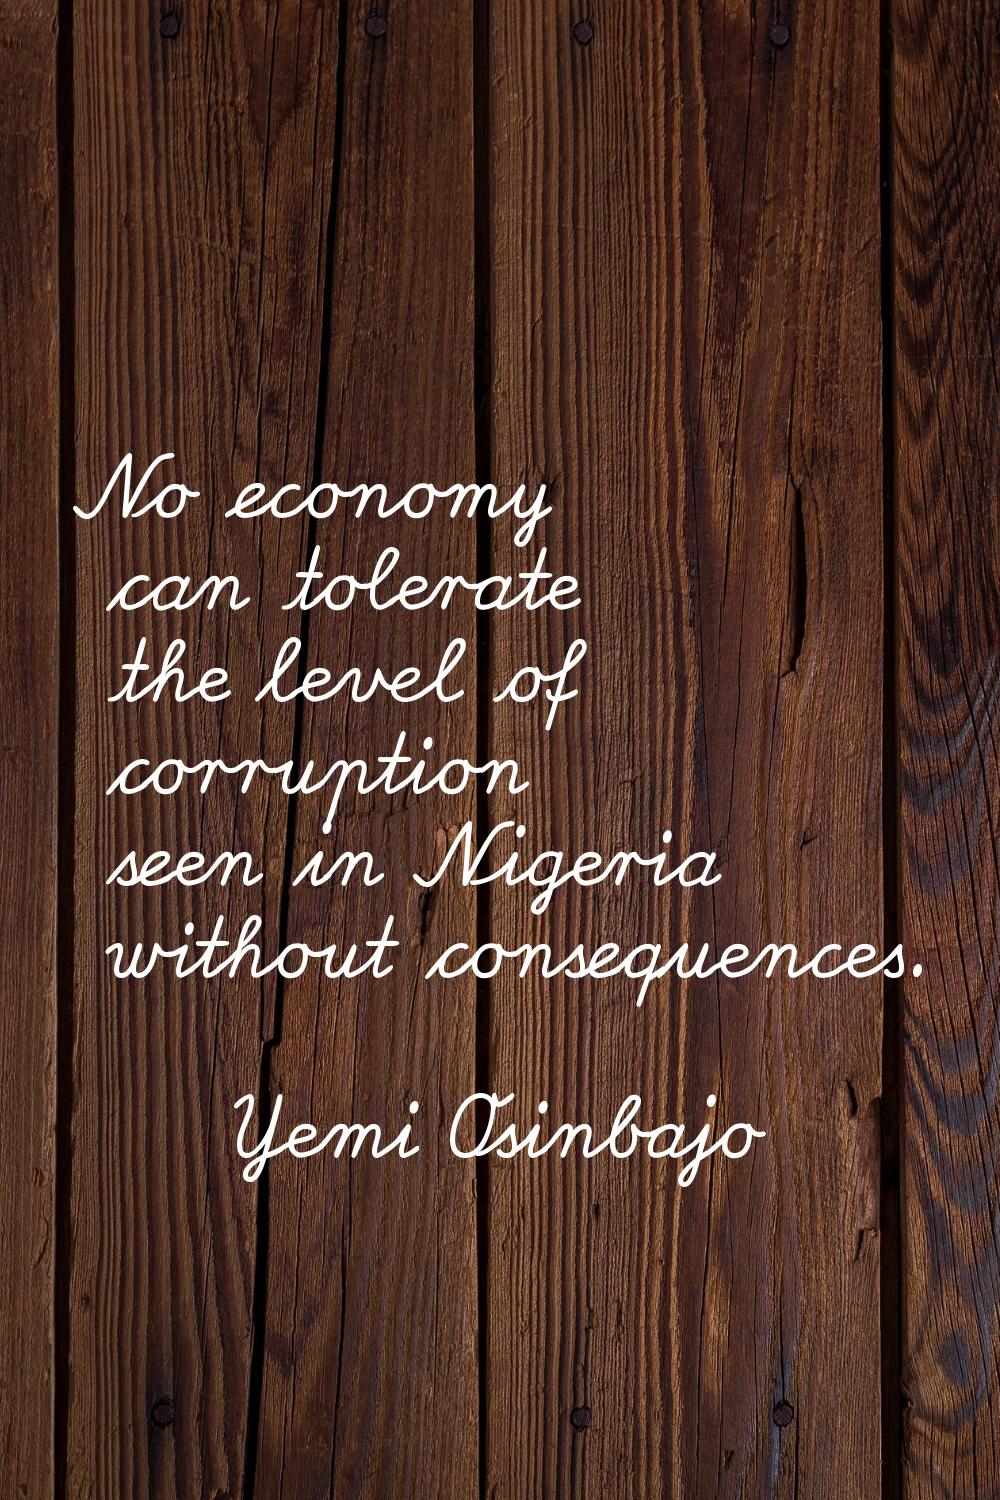 No economy can tolerate the level of corruption seen in Nigeria without consequences.